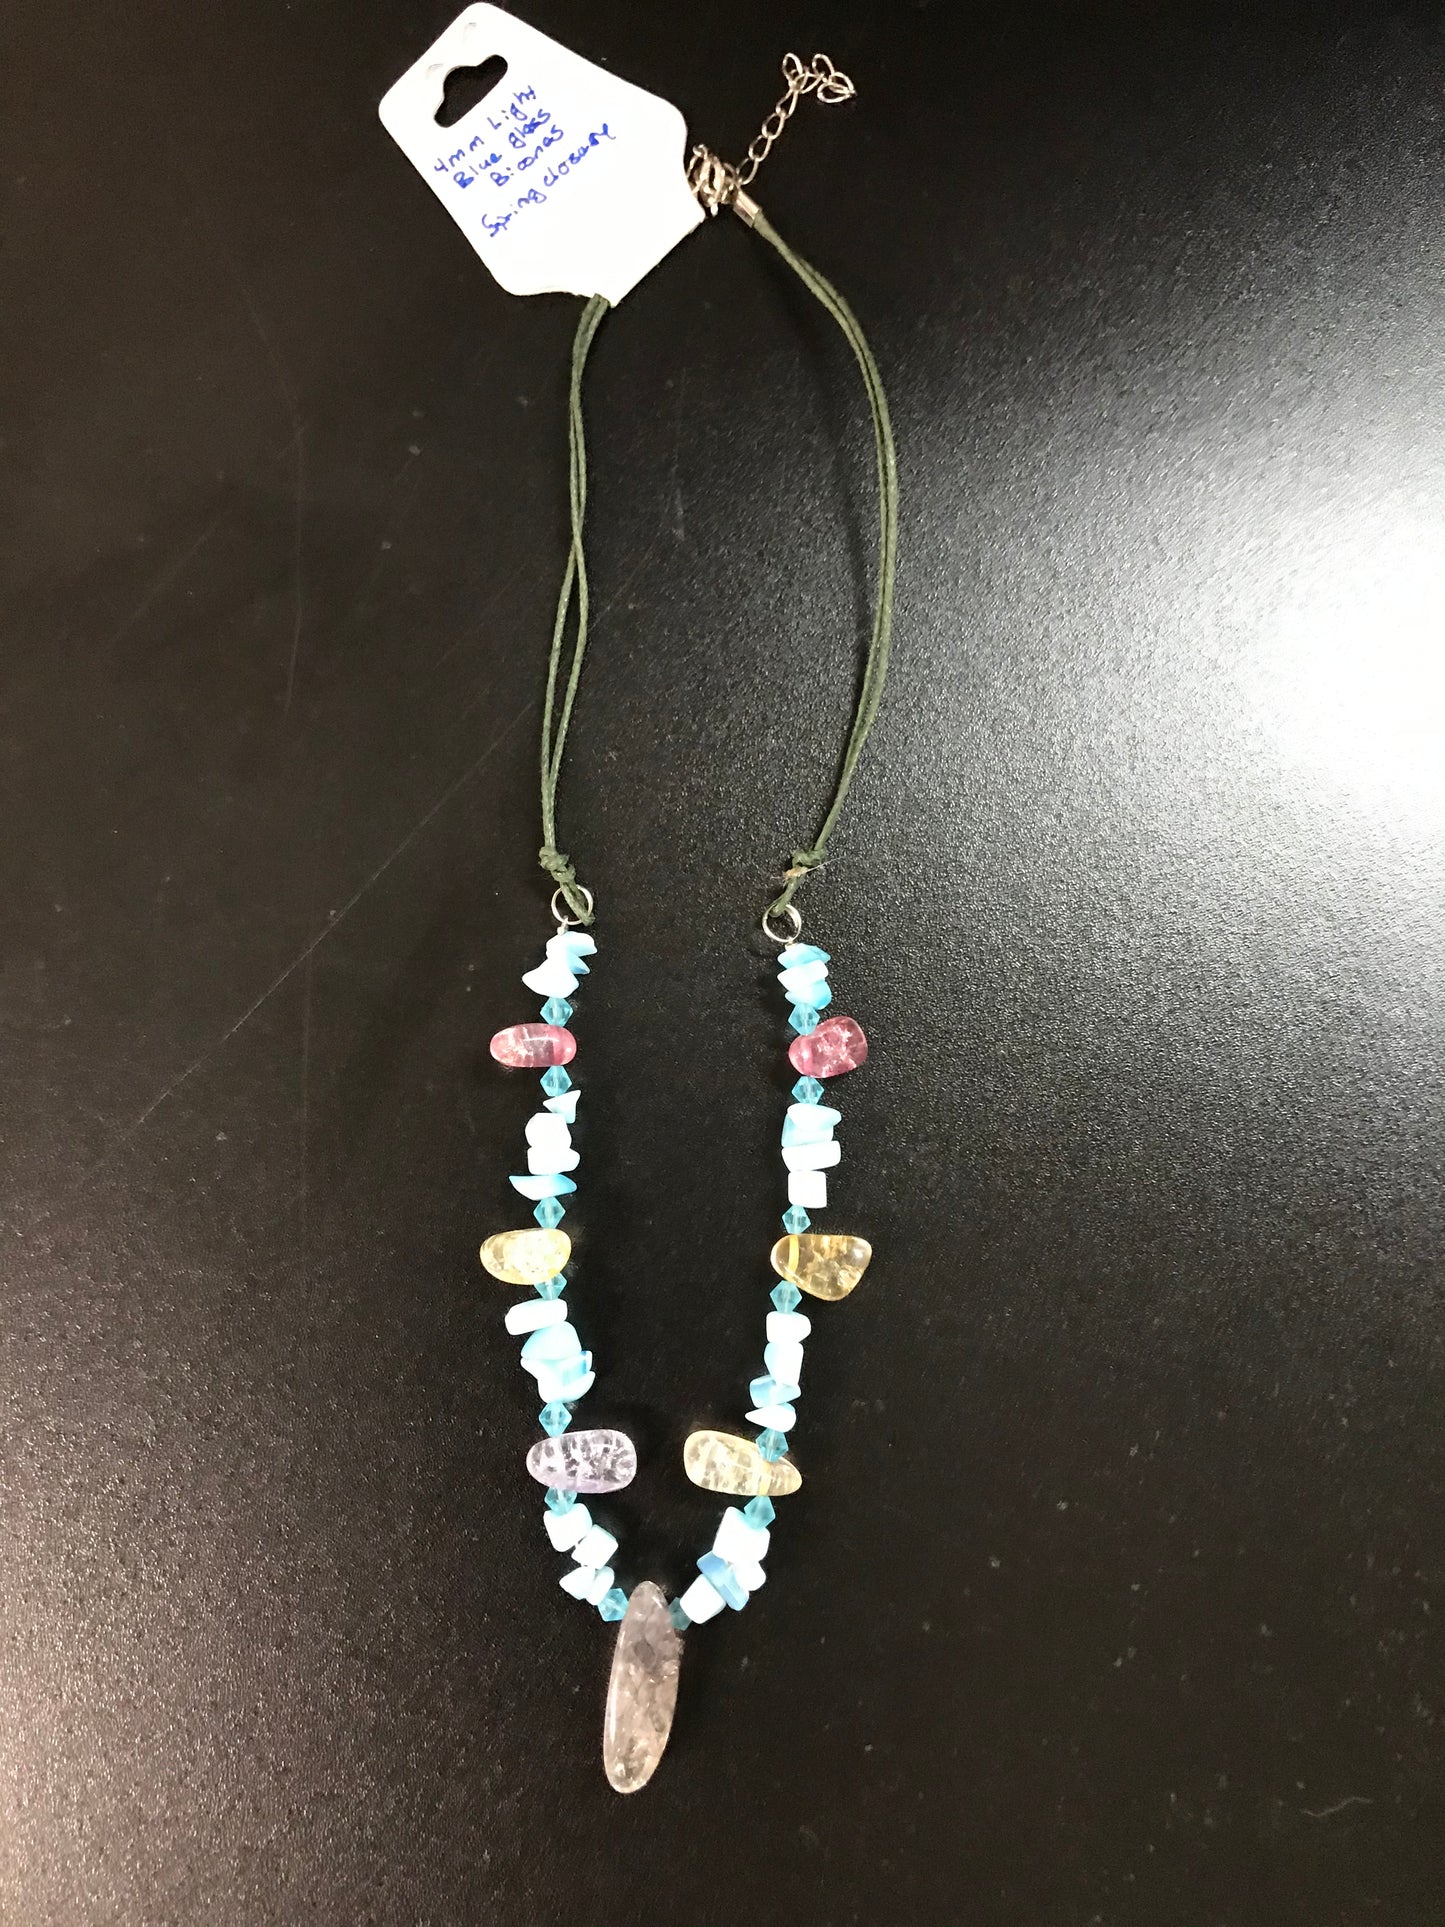 19" Crackled Glass and Amazonite Necklace